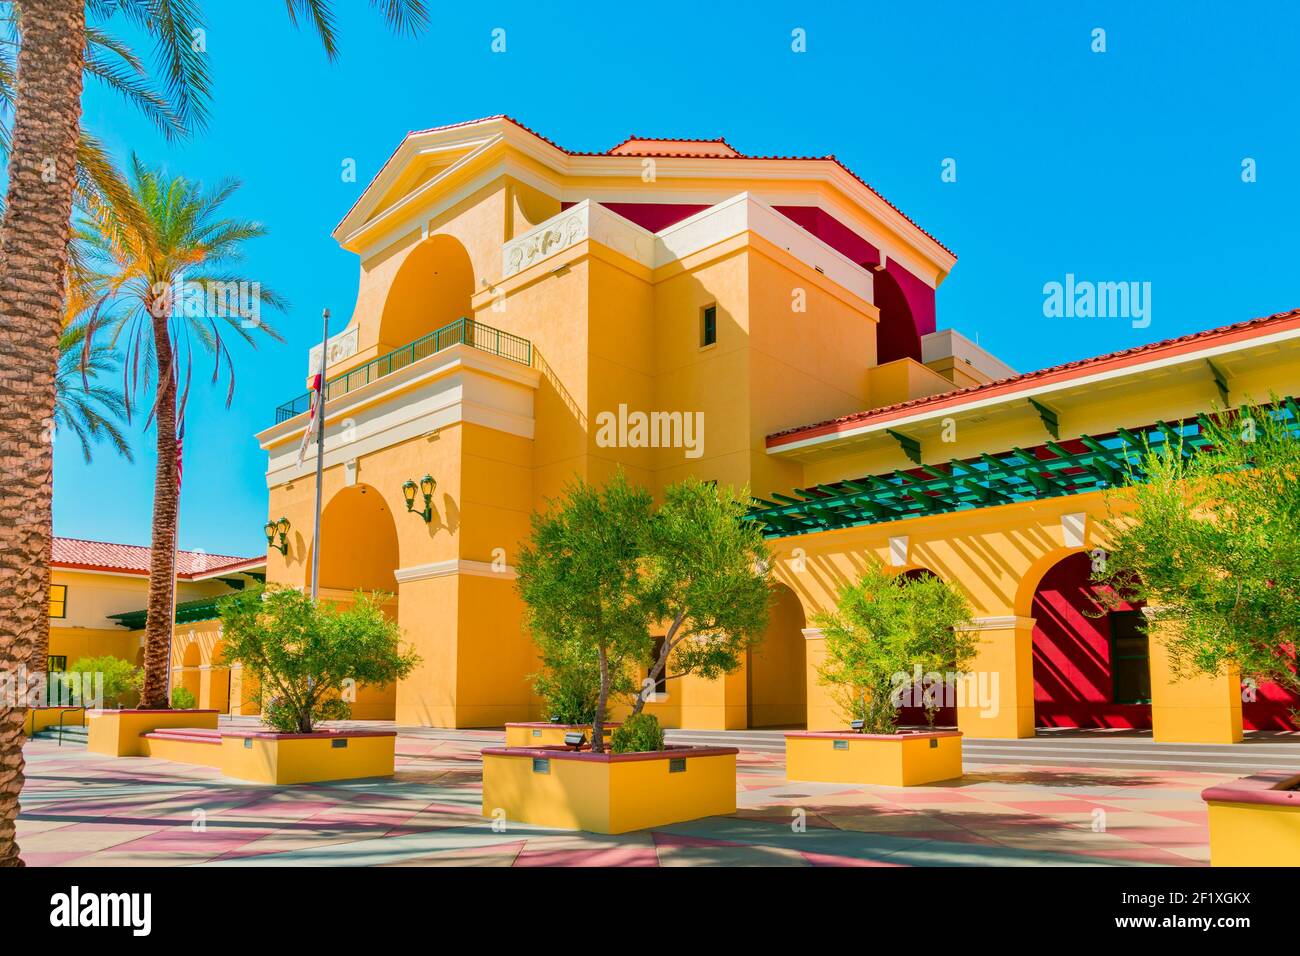 Palm trees and vegetation surround the arch ways of the Civic Center building of the Cathedral City and Palm Springs area. Stock Photo